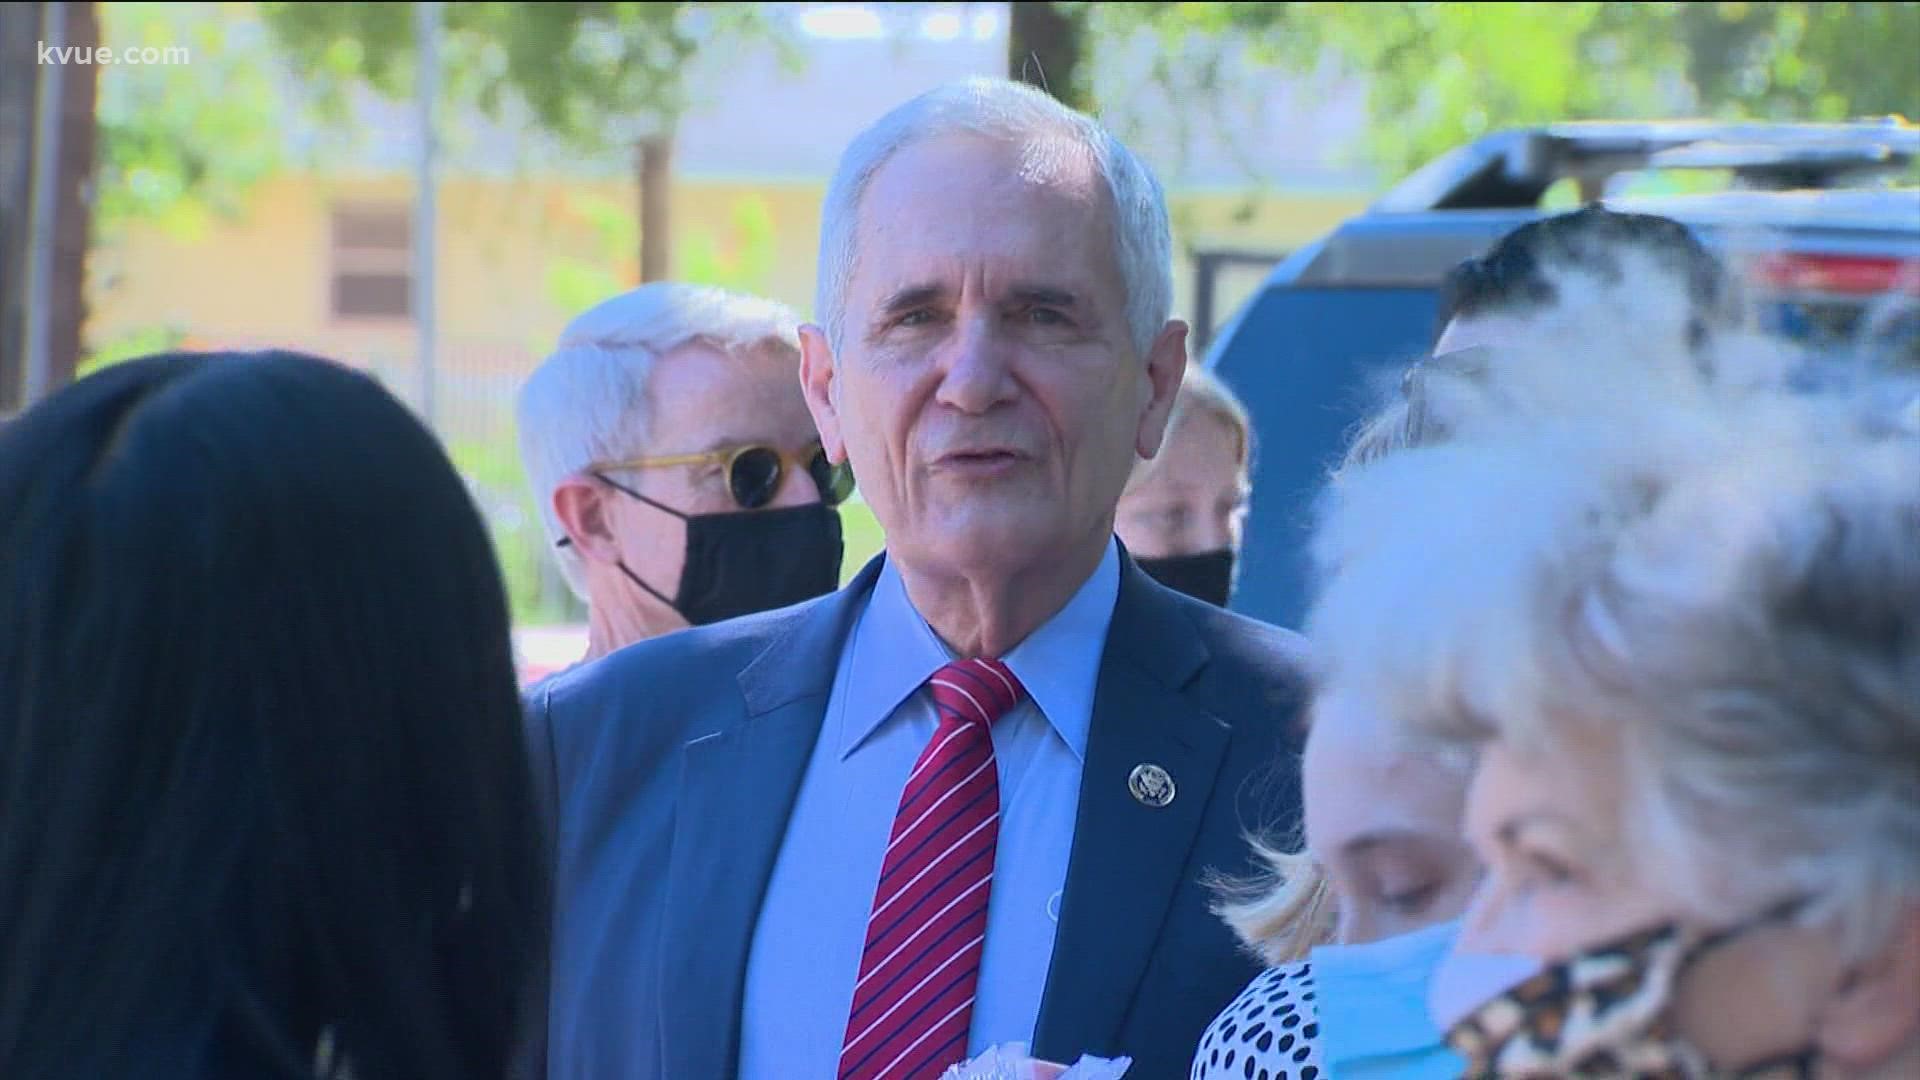 A longtime congressman is running to represent a new district in the city of Austin.